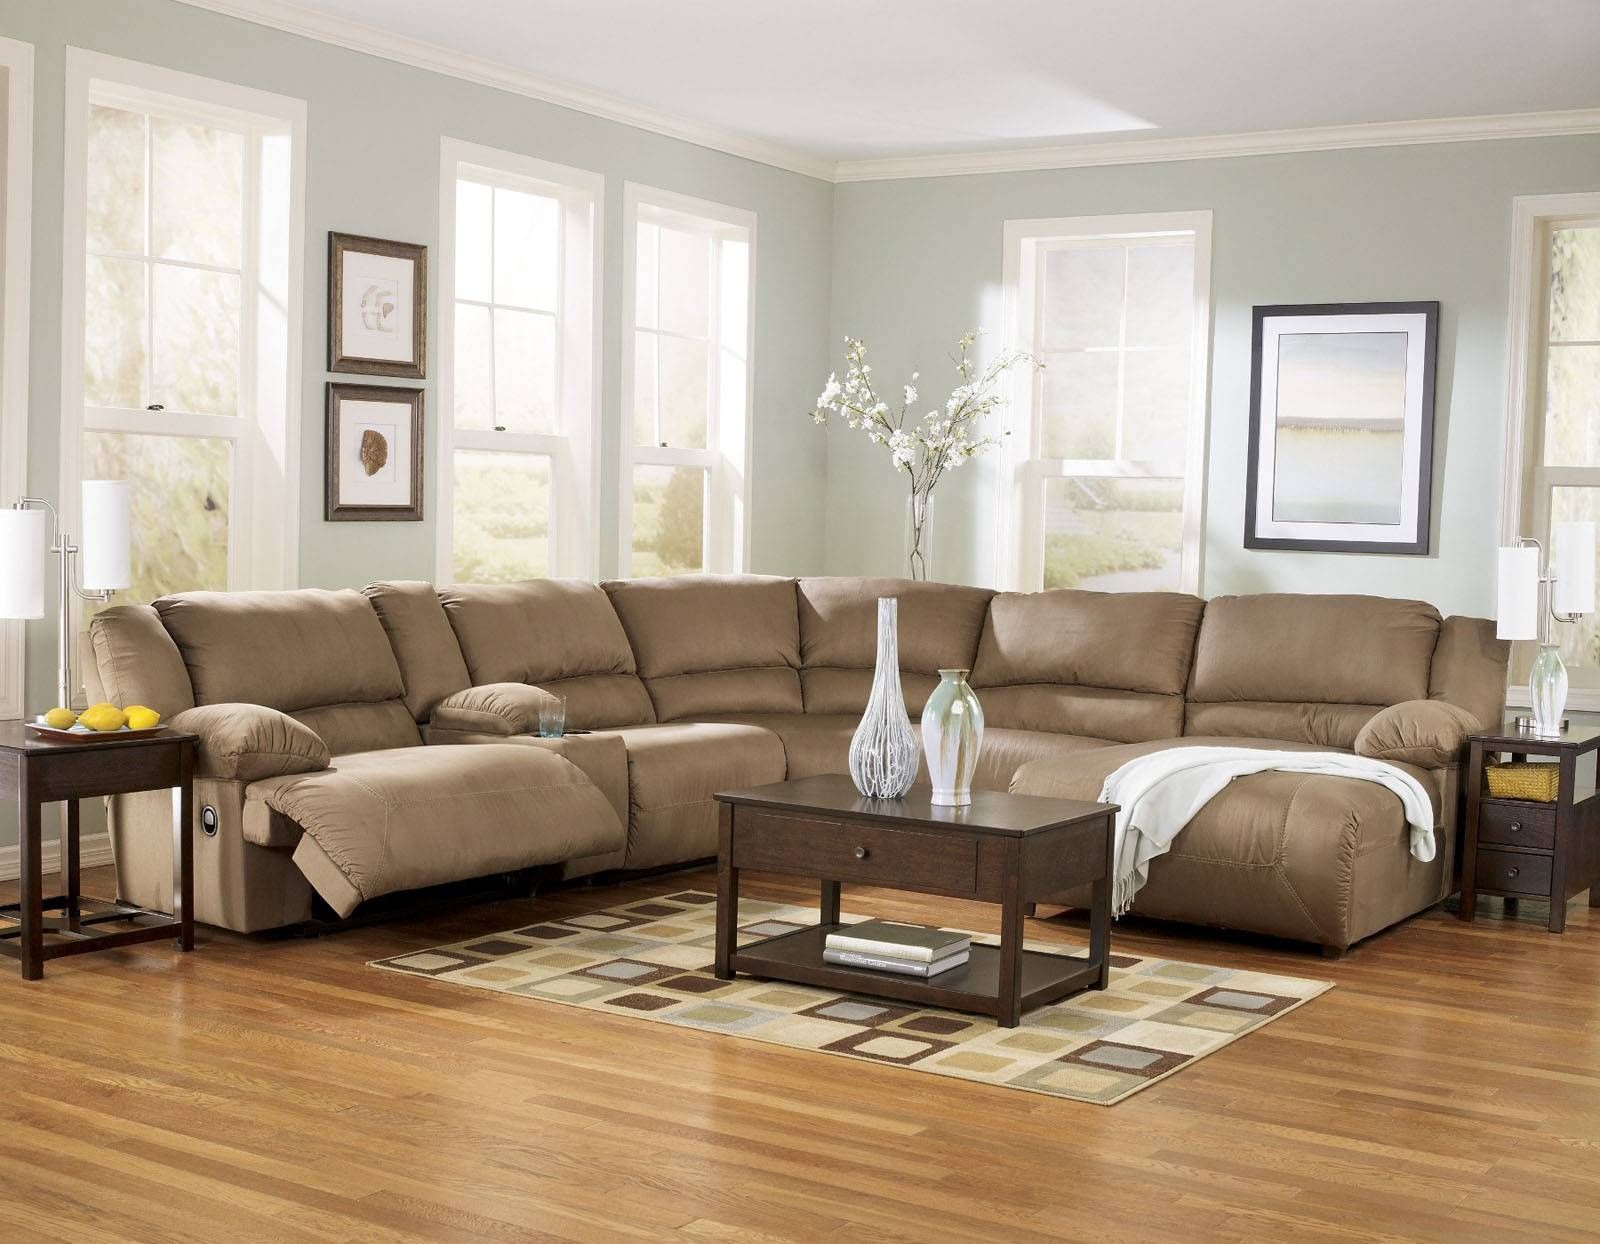 Appealing Sectional Sofa Placement Ideas 88 About Remodel Backless Throughout Backless Sectional Sofa (View 22 of 30)